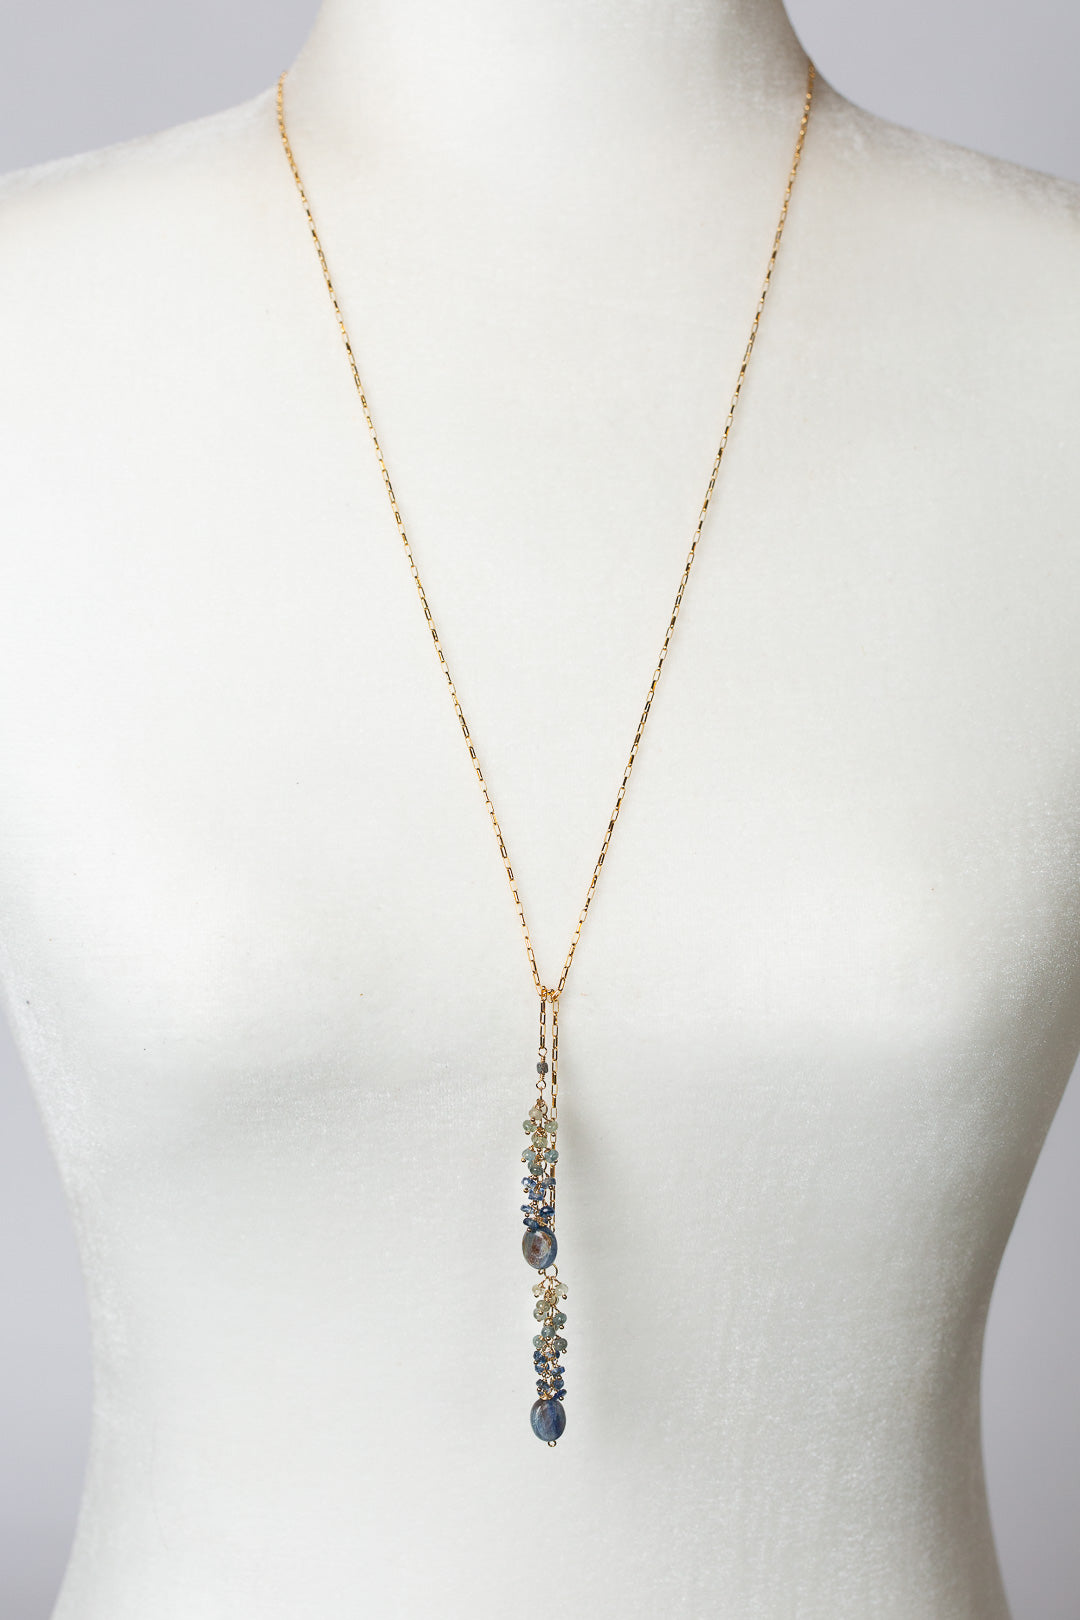 Ripple 30.5" Green Moss With Kyanite, Gold Tassel Necklace